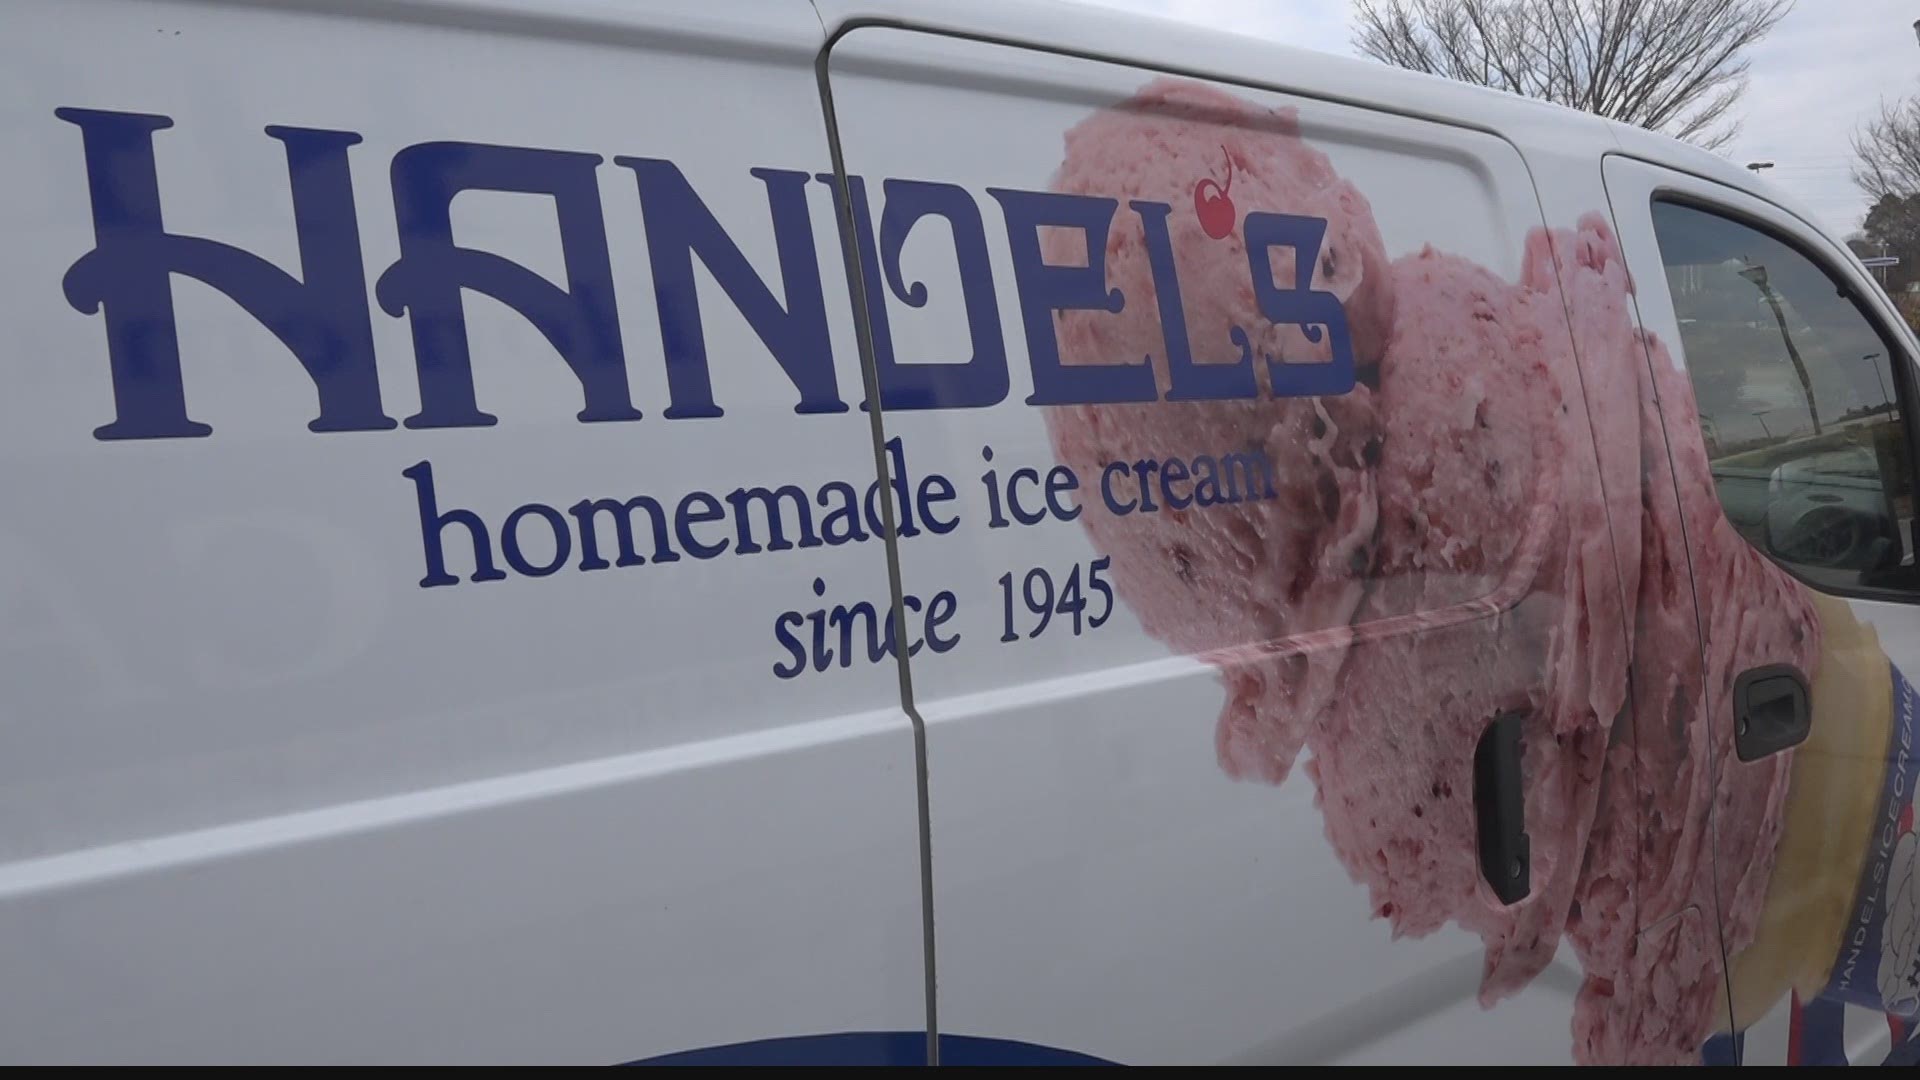 Handel's Ice Cream will reopen its doors on Thursday, February 11, after being closed for months due to the previous owner making offensive Facebook posts.